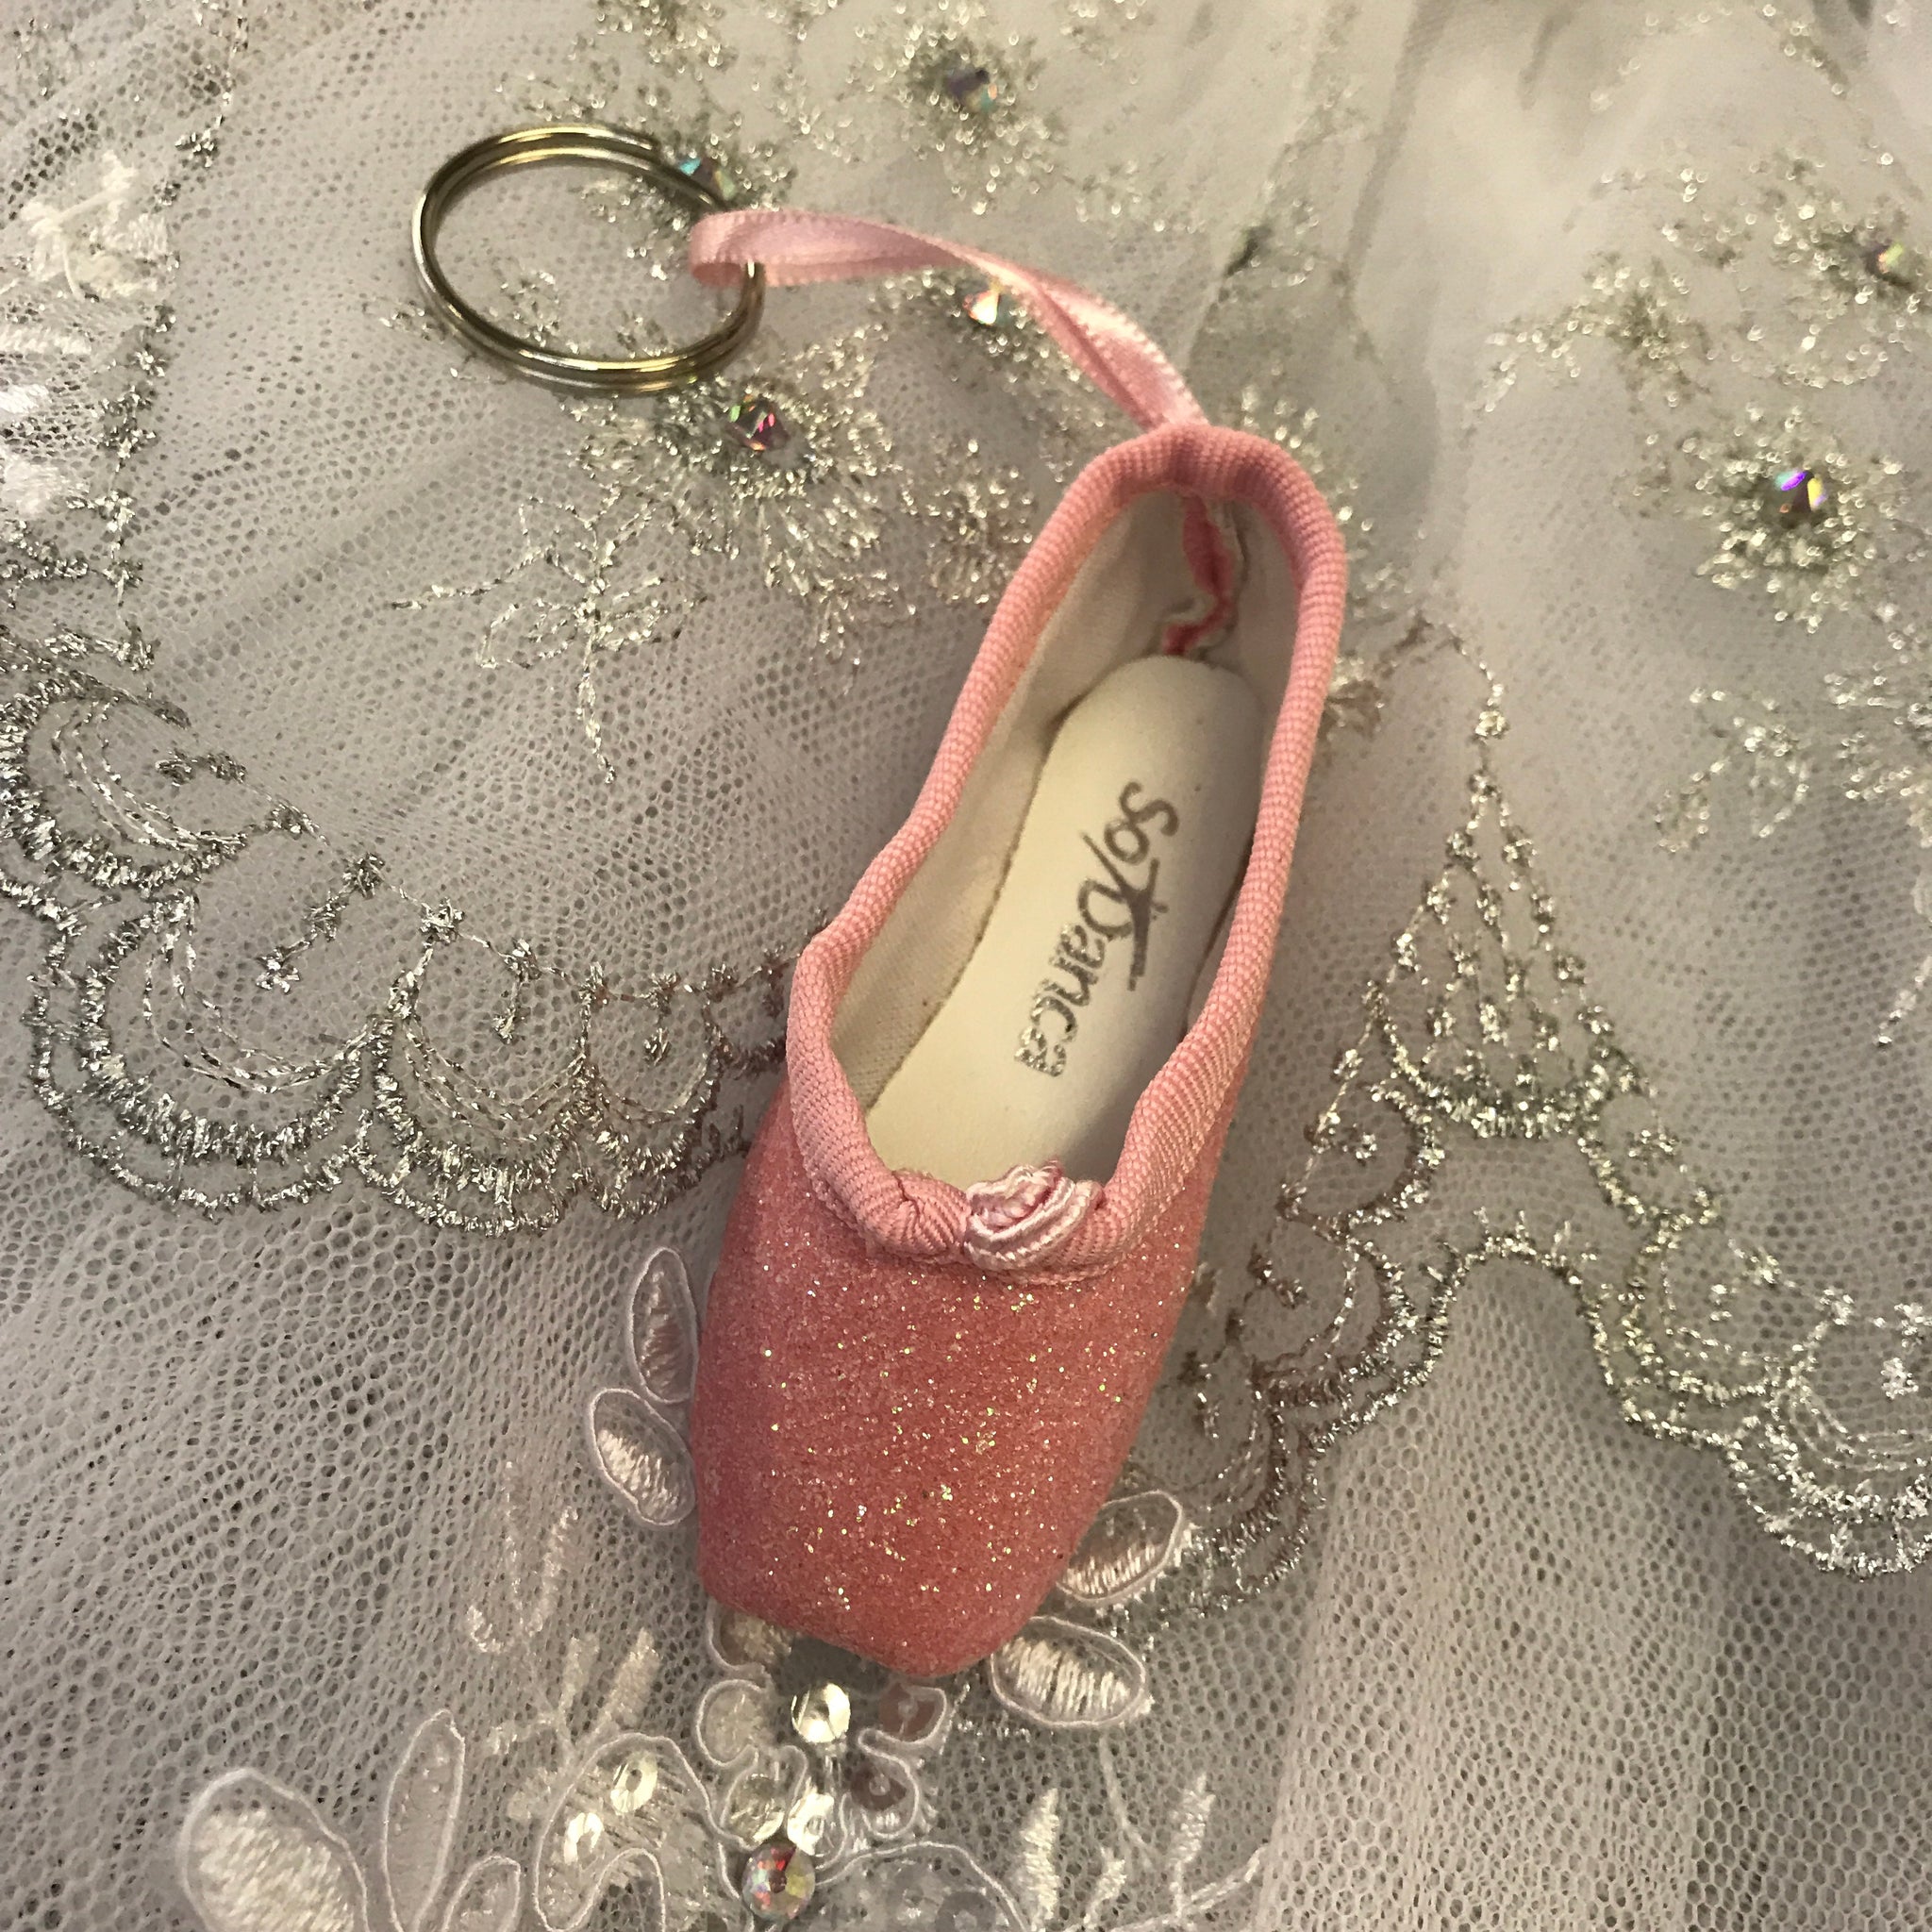 sparkly pointe shoes